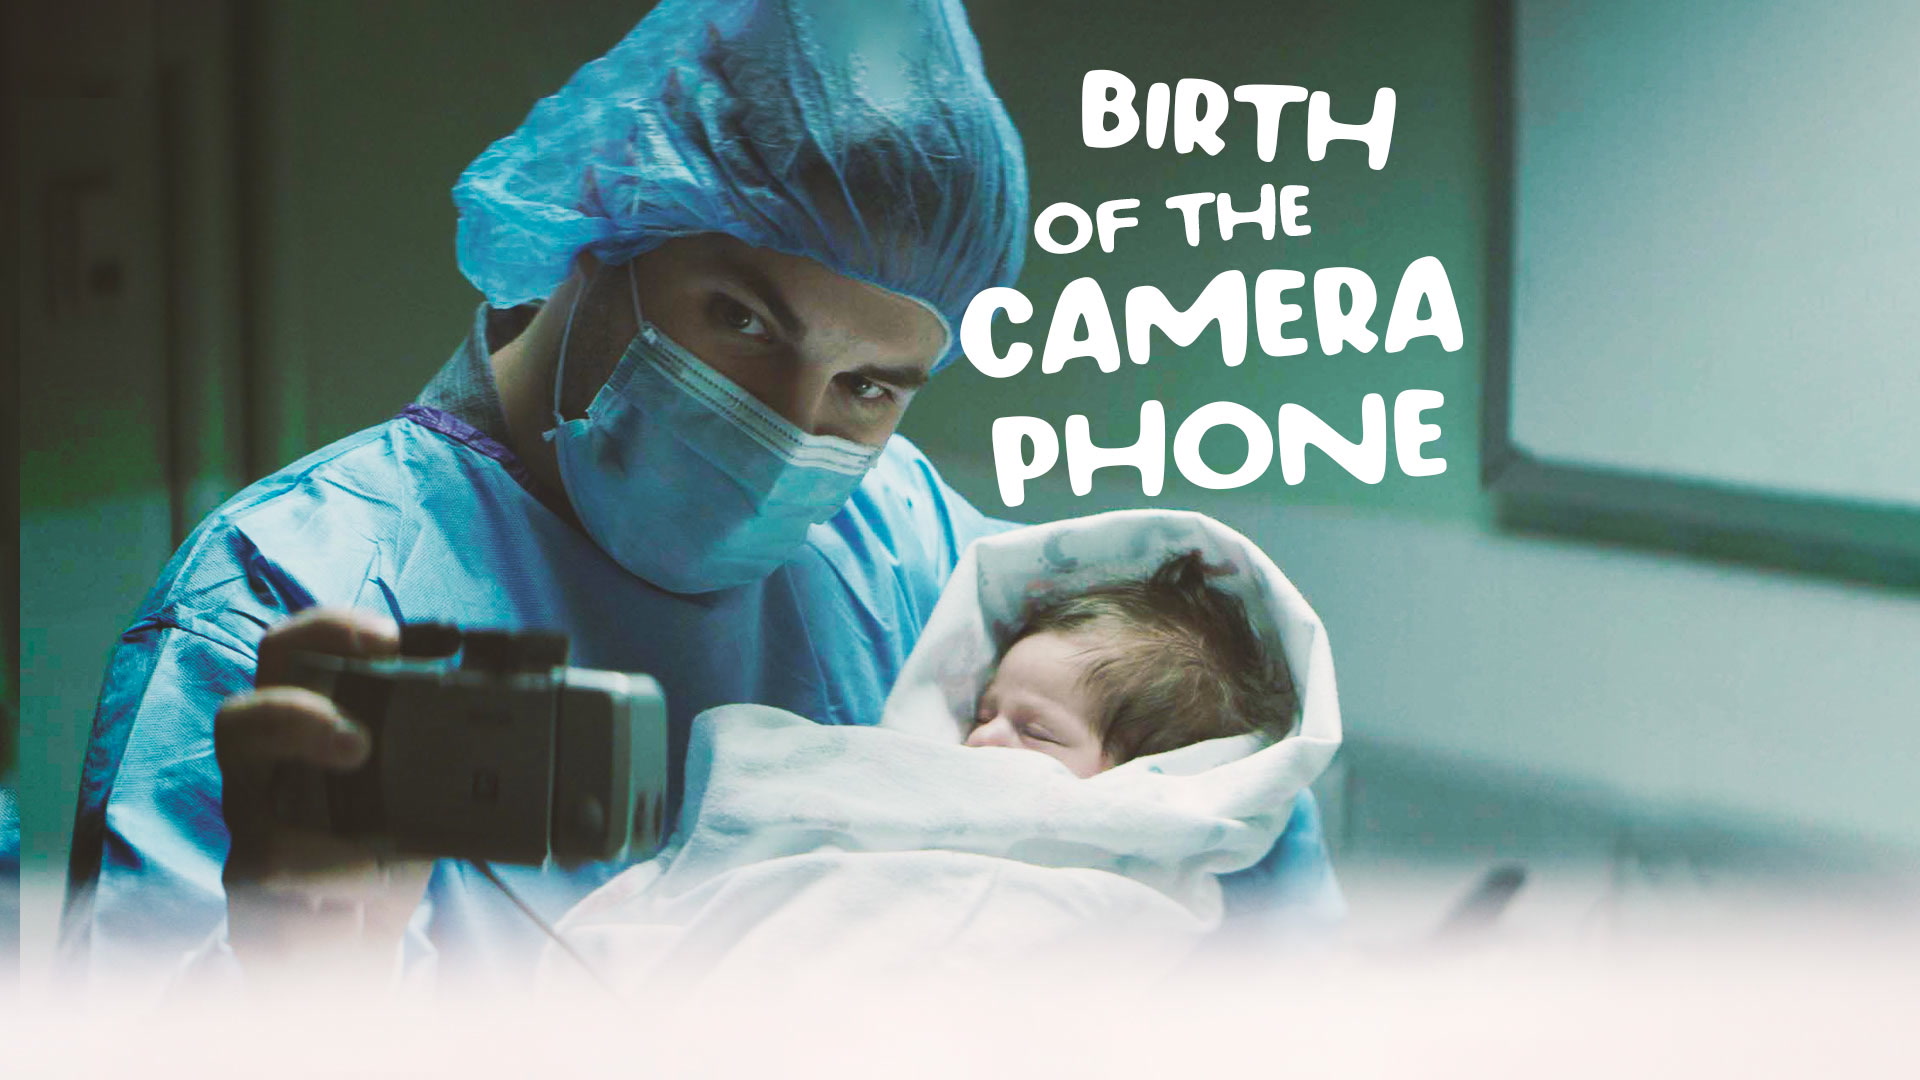 The Birth Of The Camera Phone